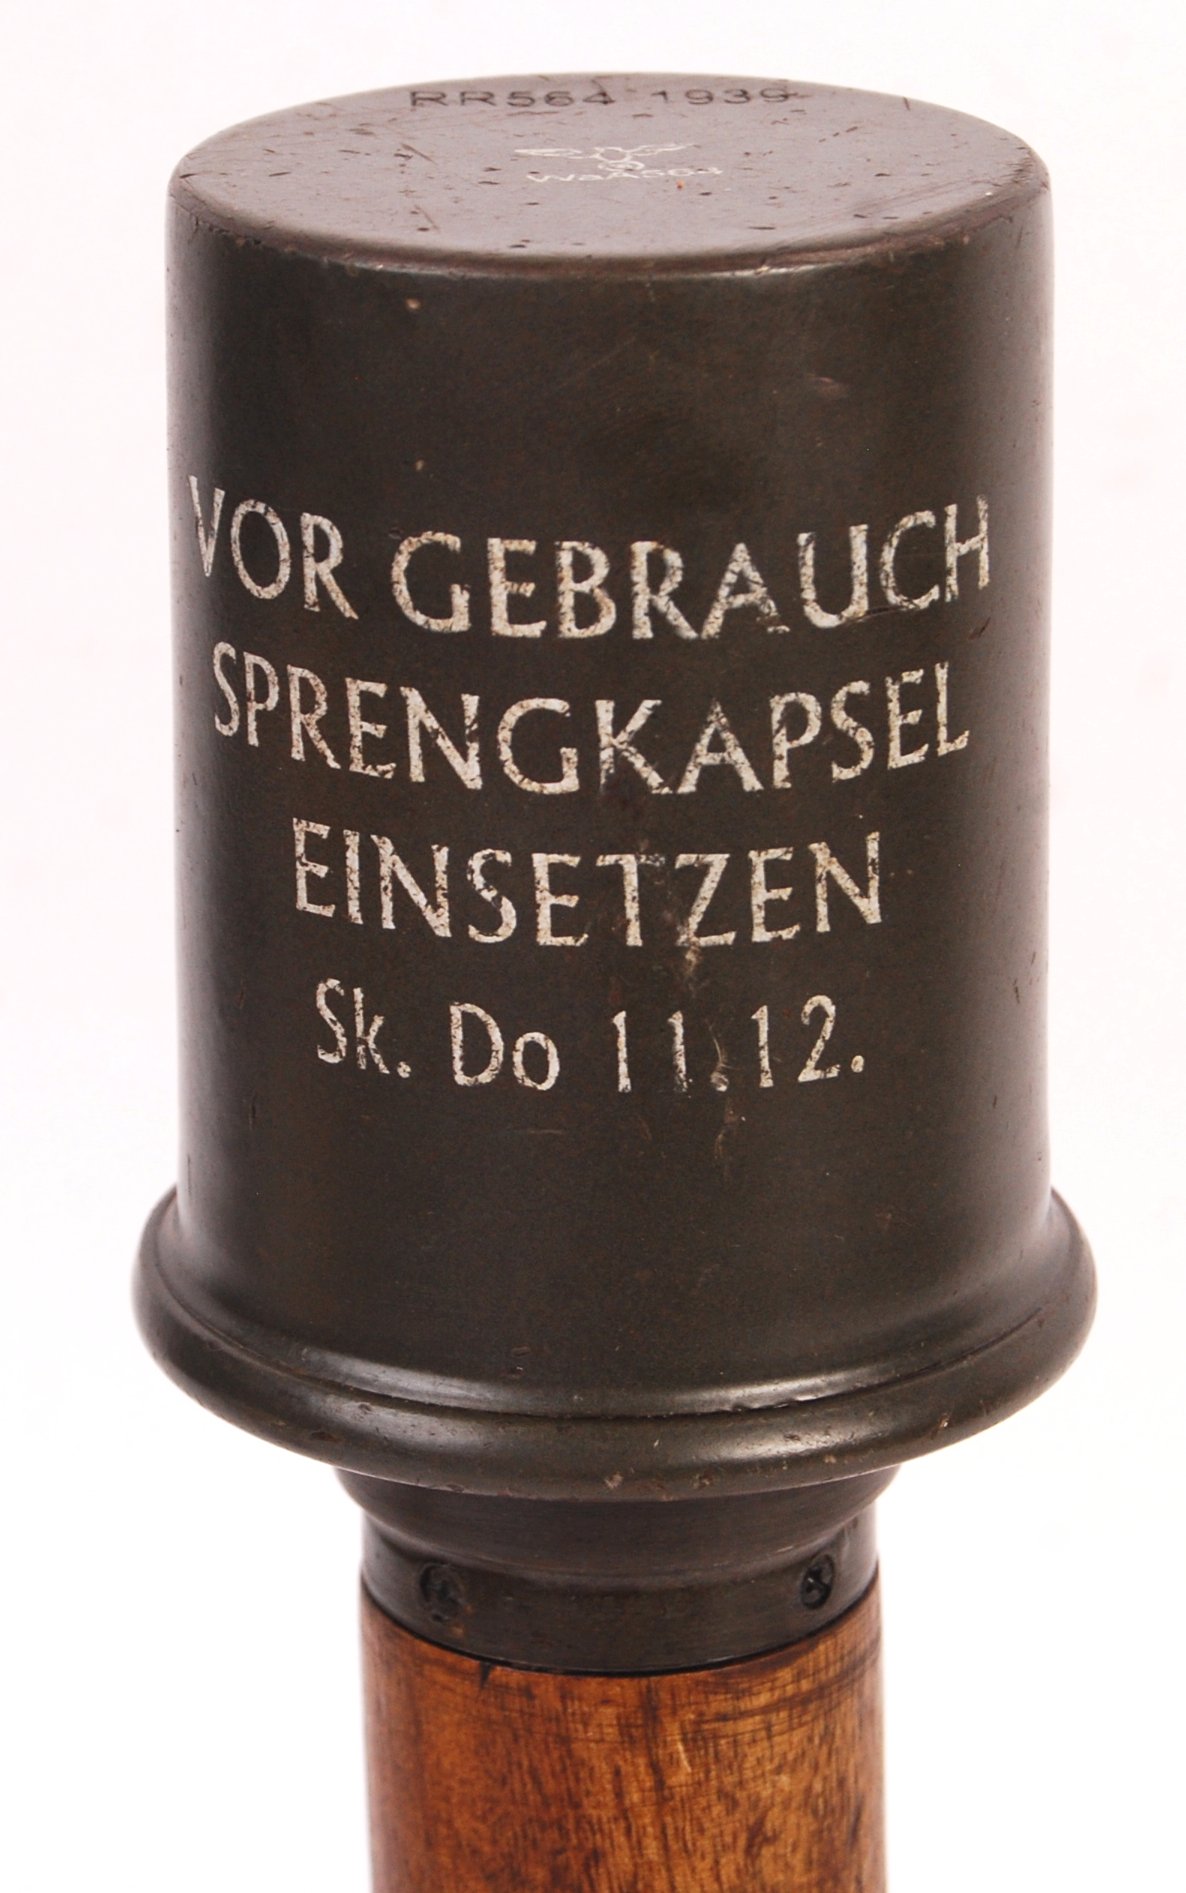 WWII SECOND WORLD WAR GERMAN ARMY STICK GRENADE - Image 2 of 5